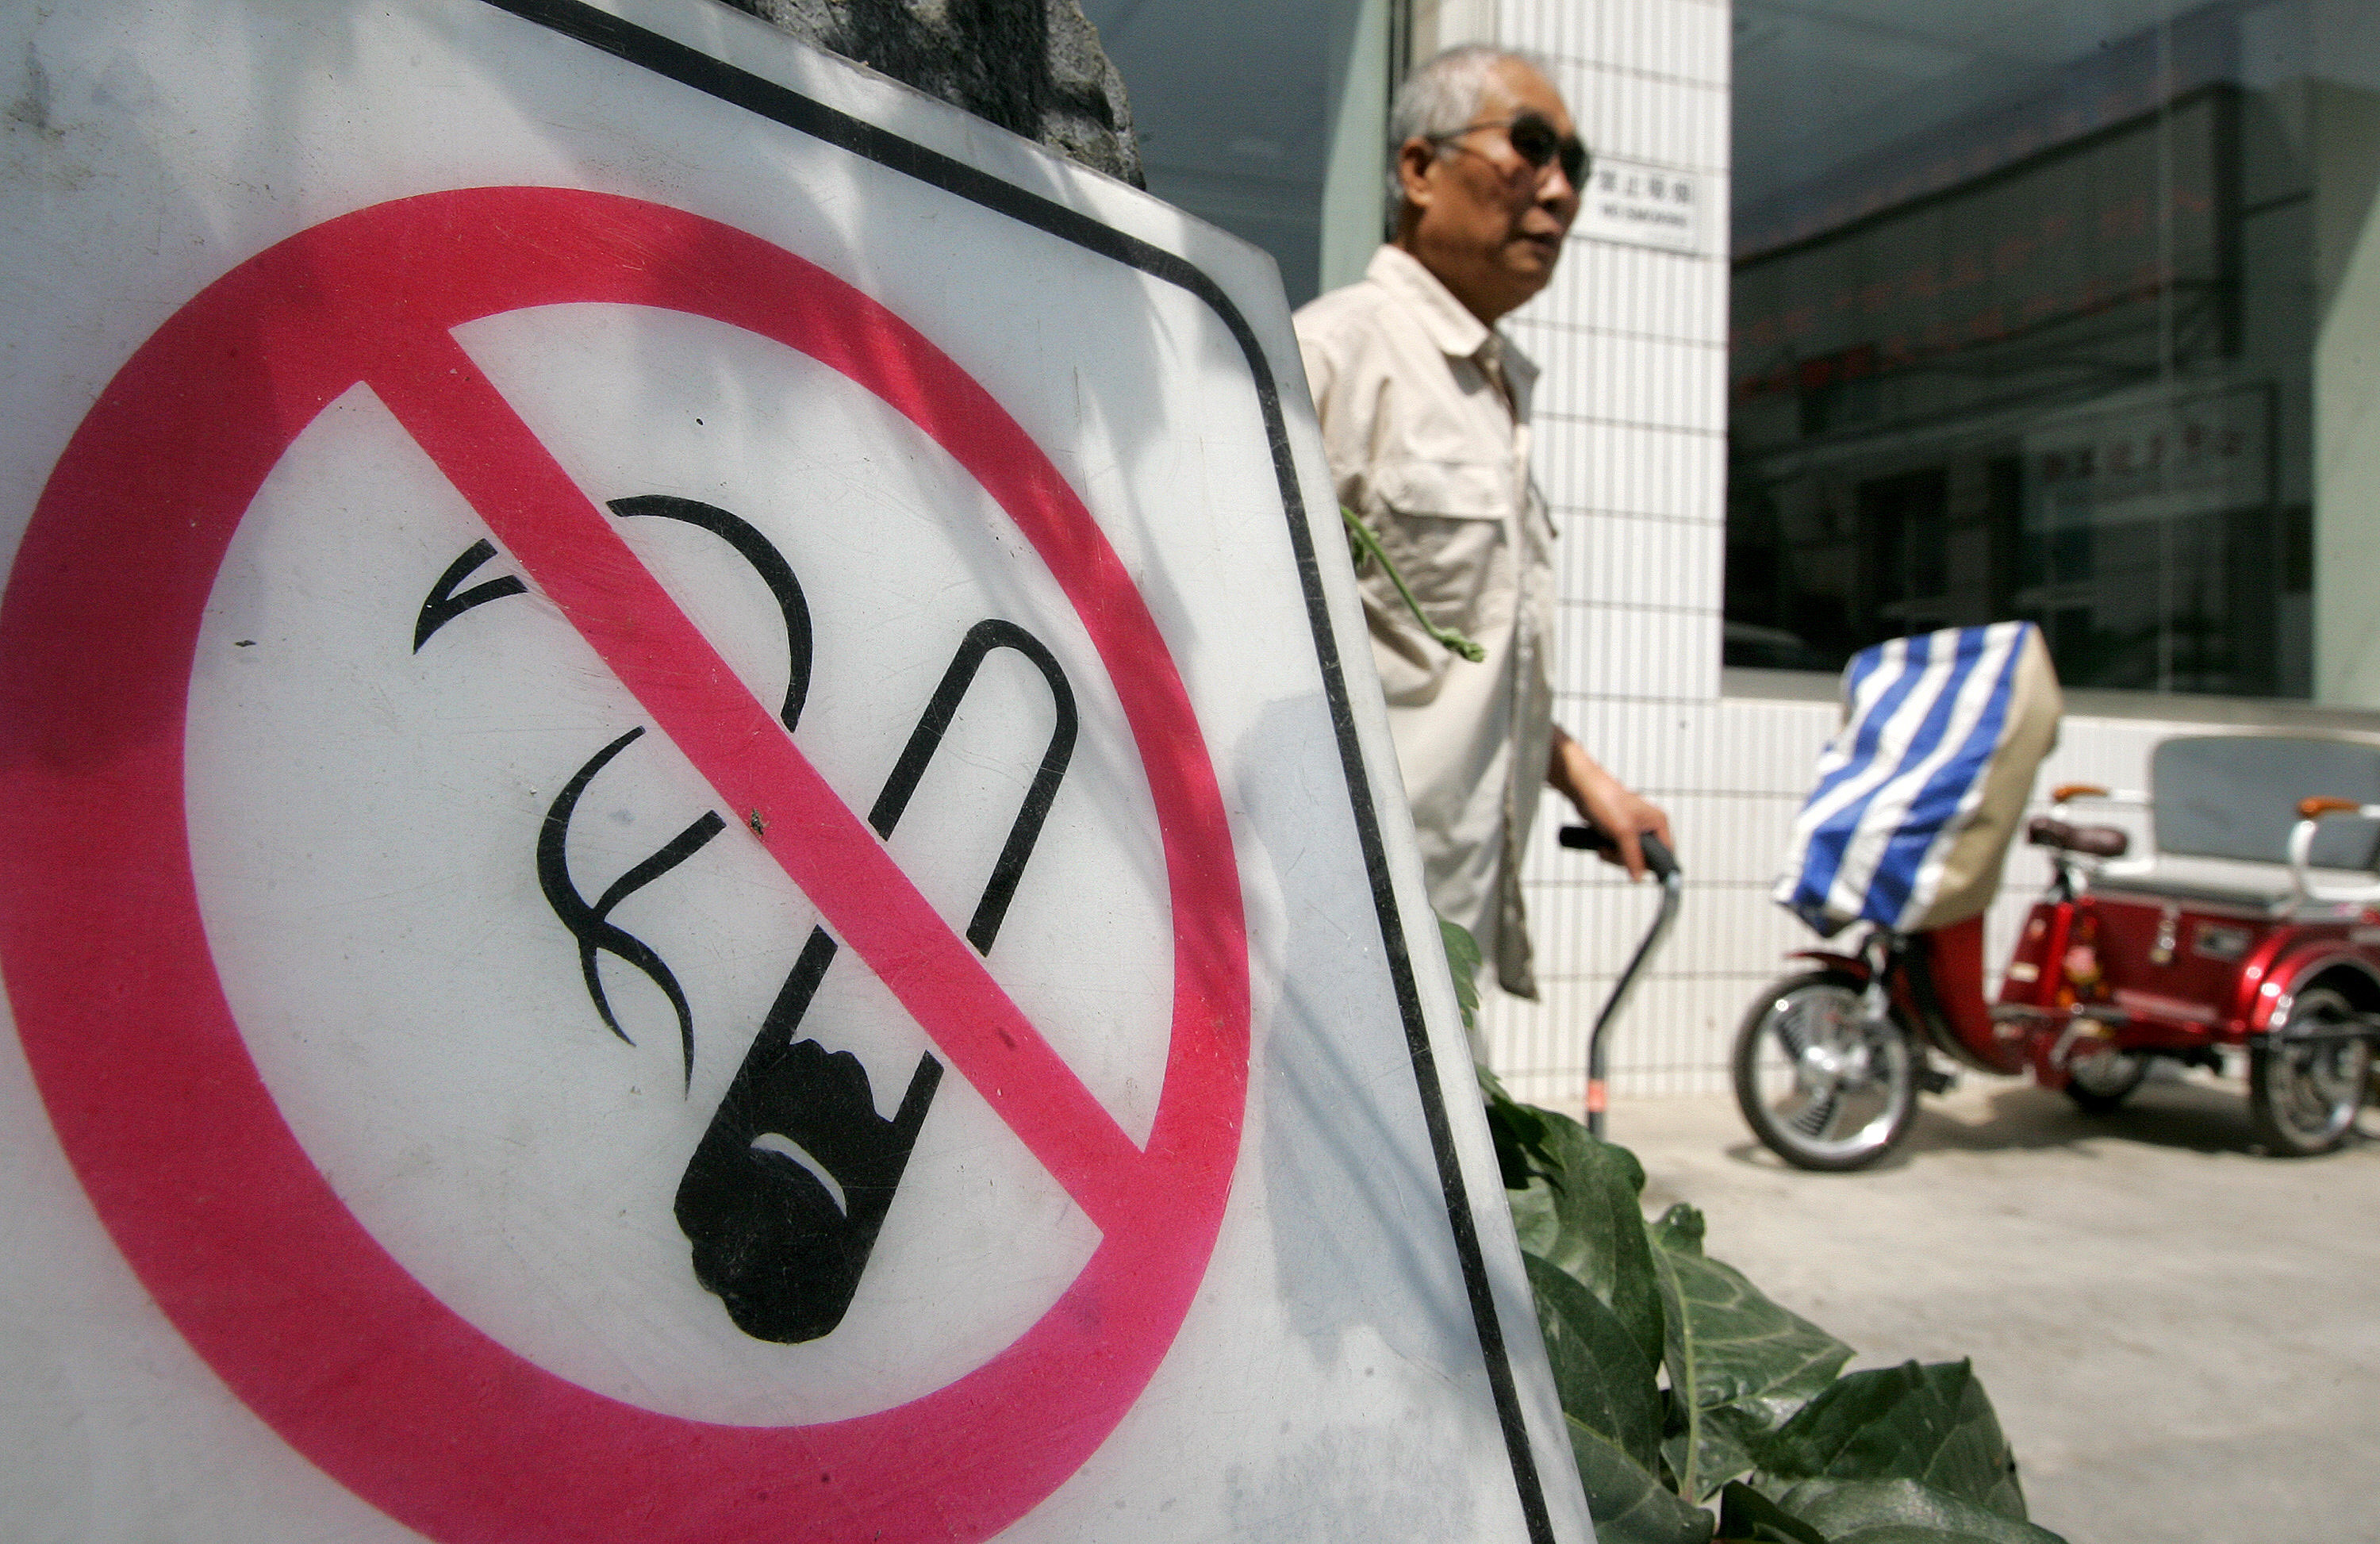 A man walks past a no smoking sign in Beijing. China, which has around 300 million smokers, is considered the world’s largest market for tobacco products. Photo: AFP